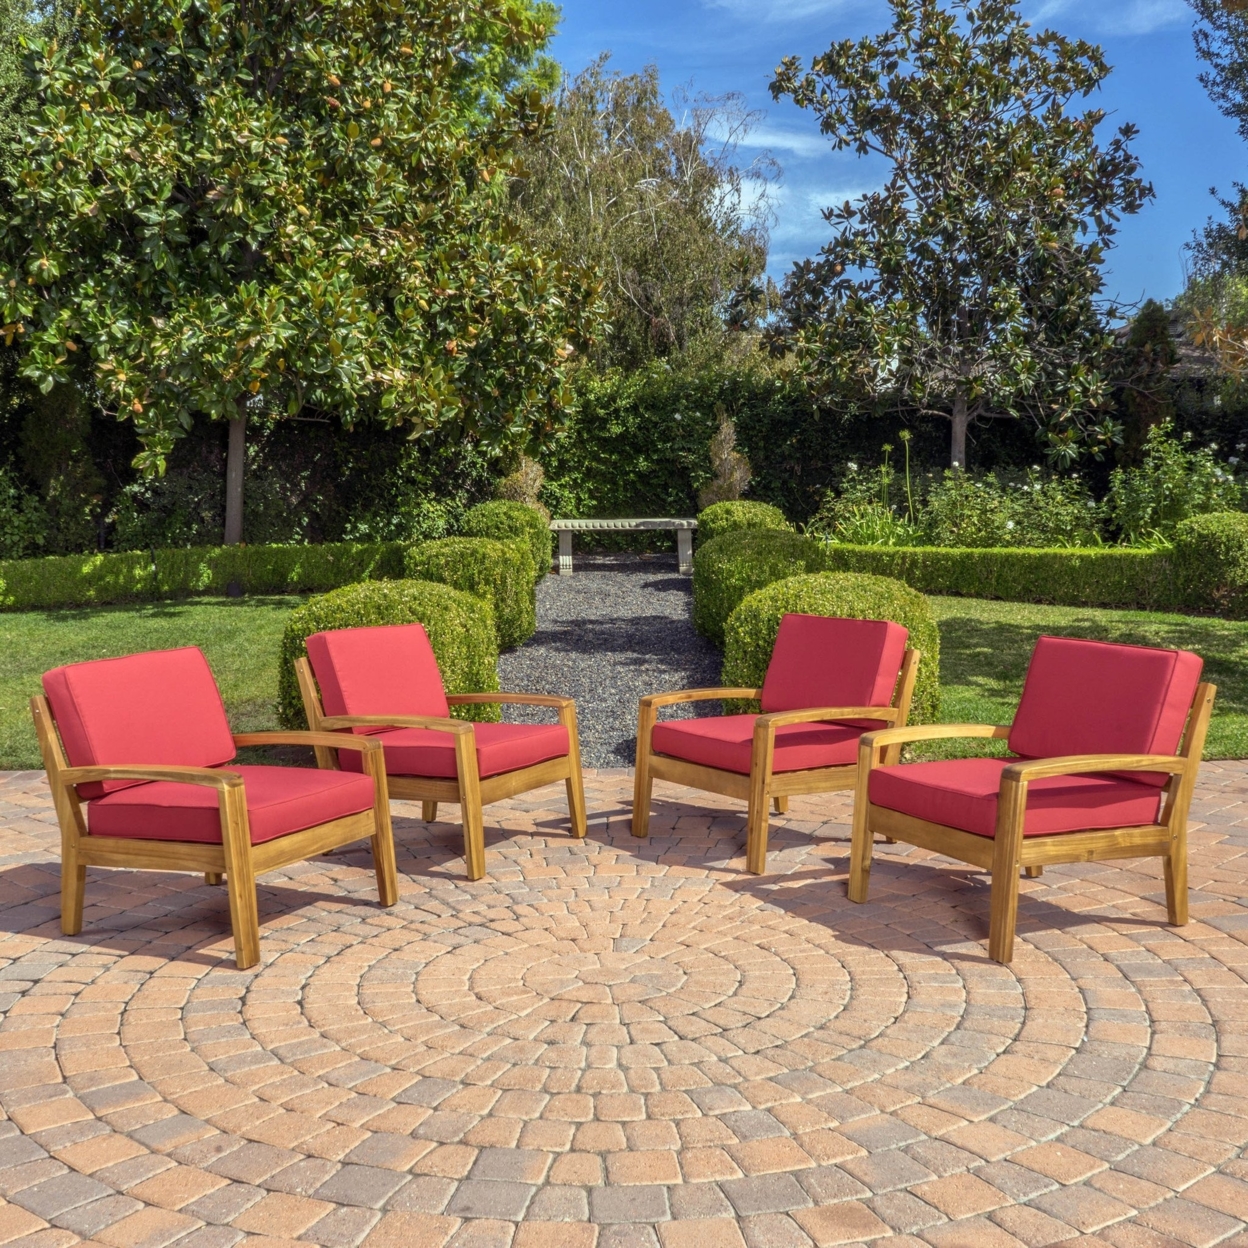 Parma Outdoor Acacia Wood Club Chairs With Cushions (Set Of 4) - Red